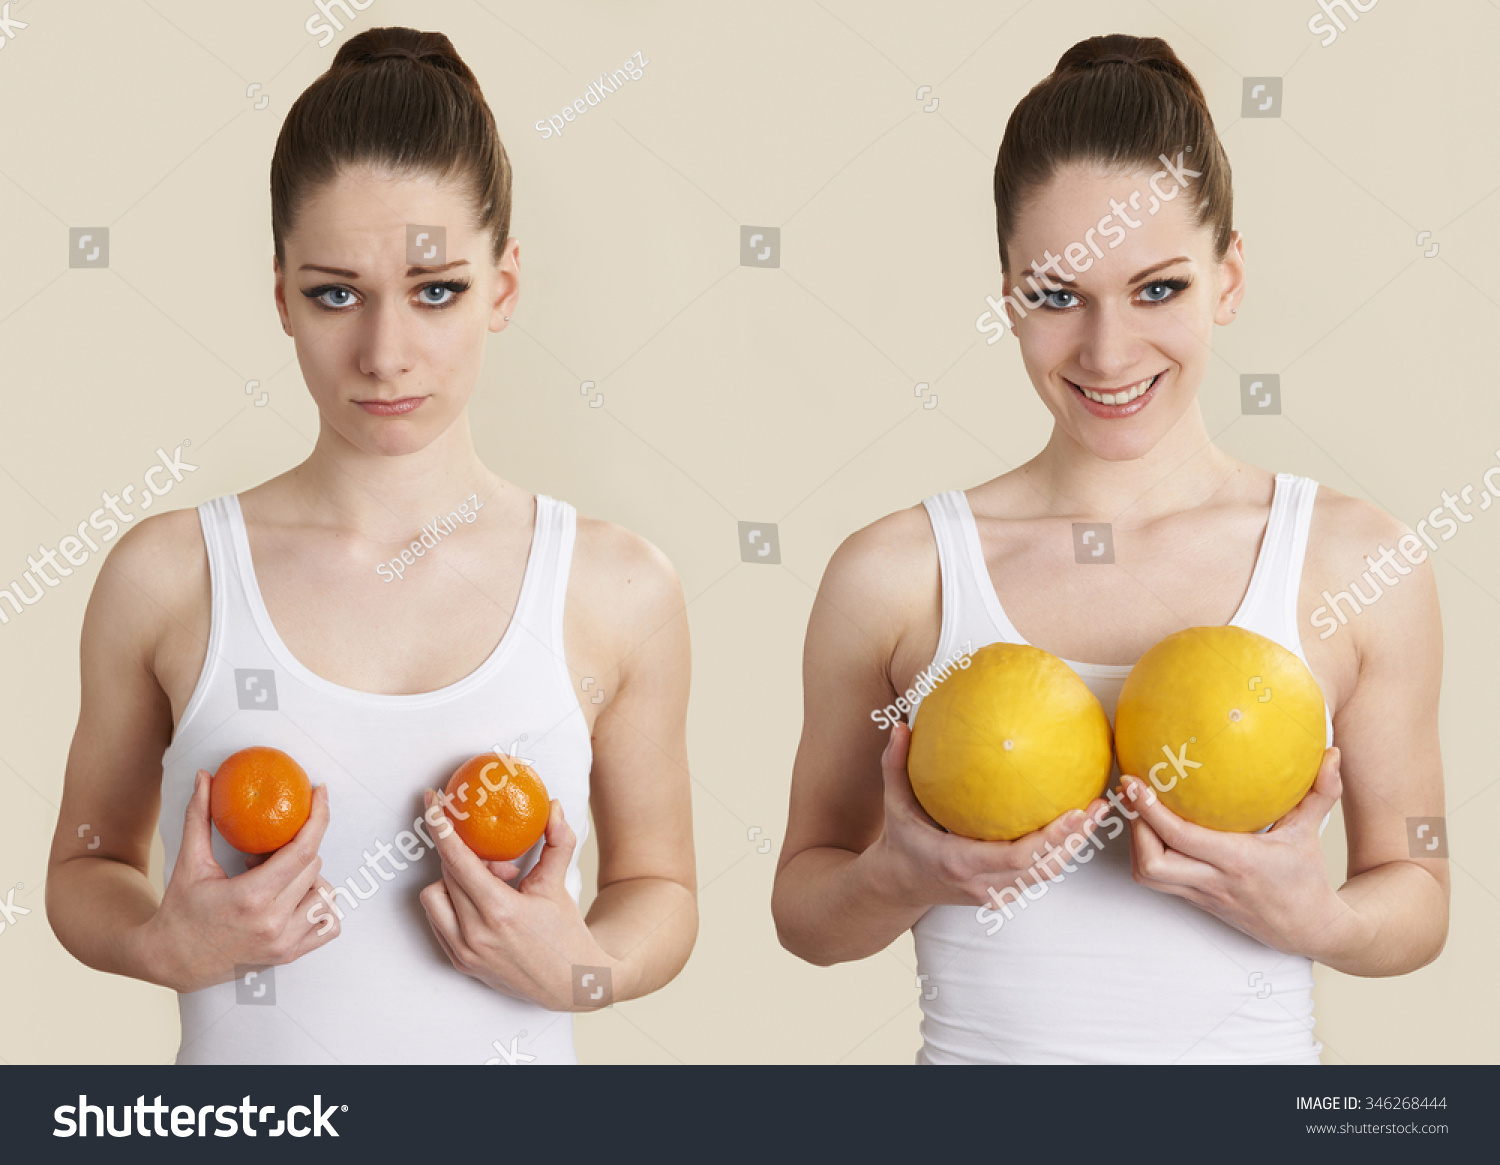 http://image.shutterstock.com/z/stock-photo-conceptual-image-to-illustrate-breast-enlargement-surgery-346268444.jpg